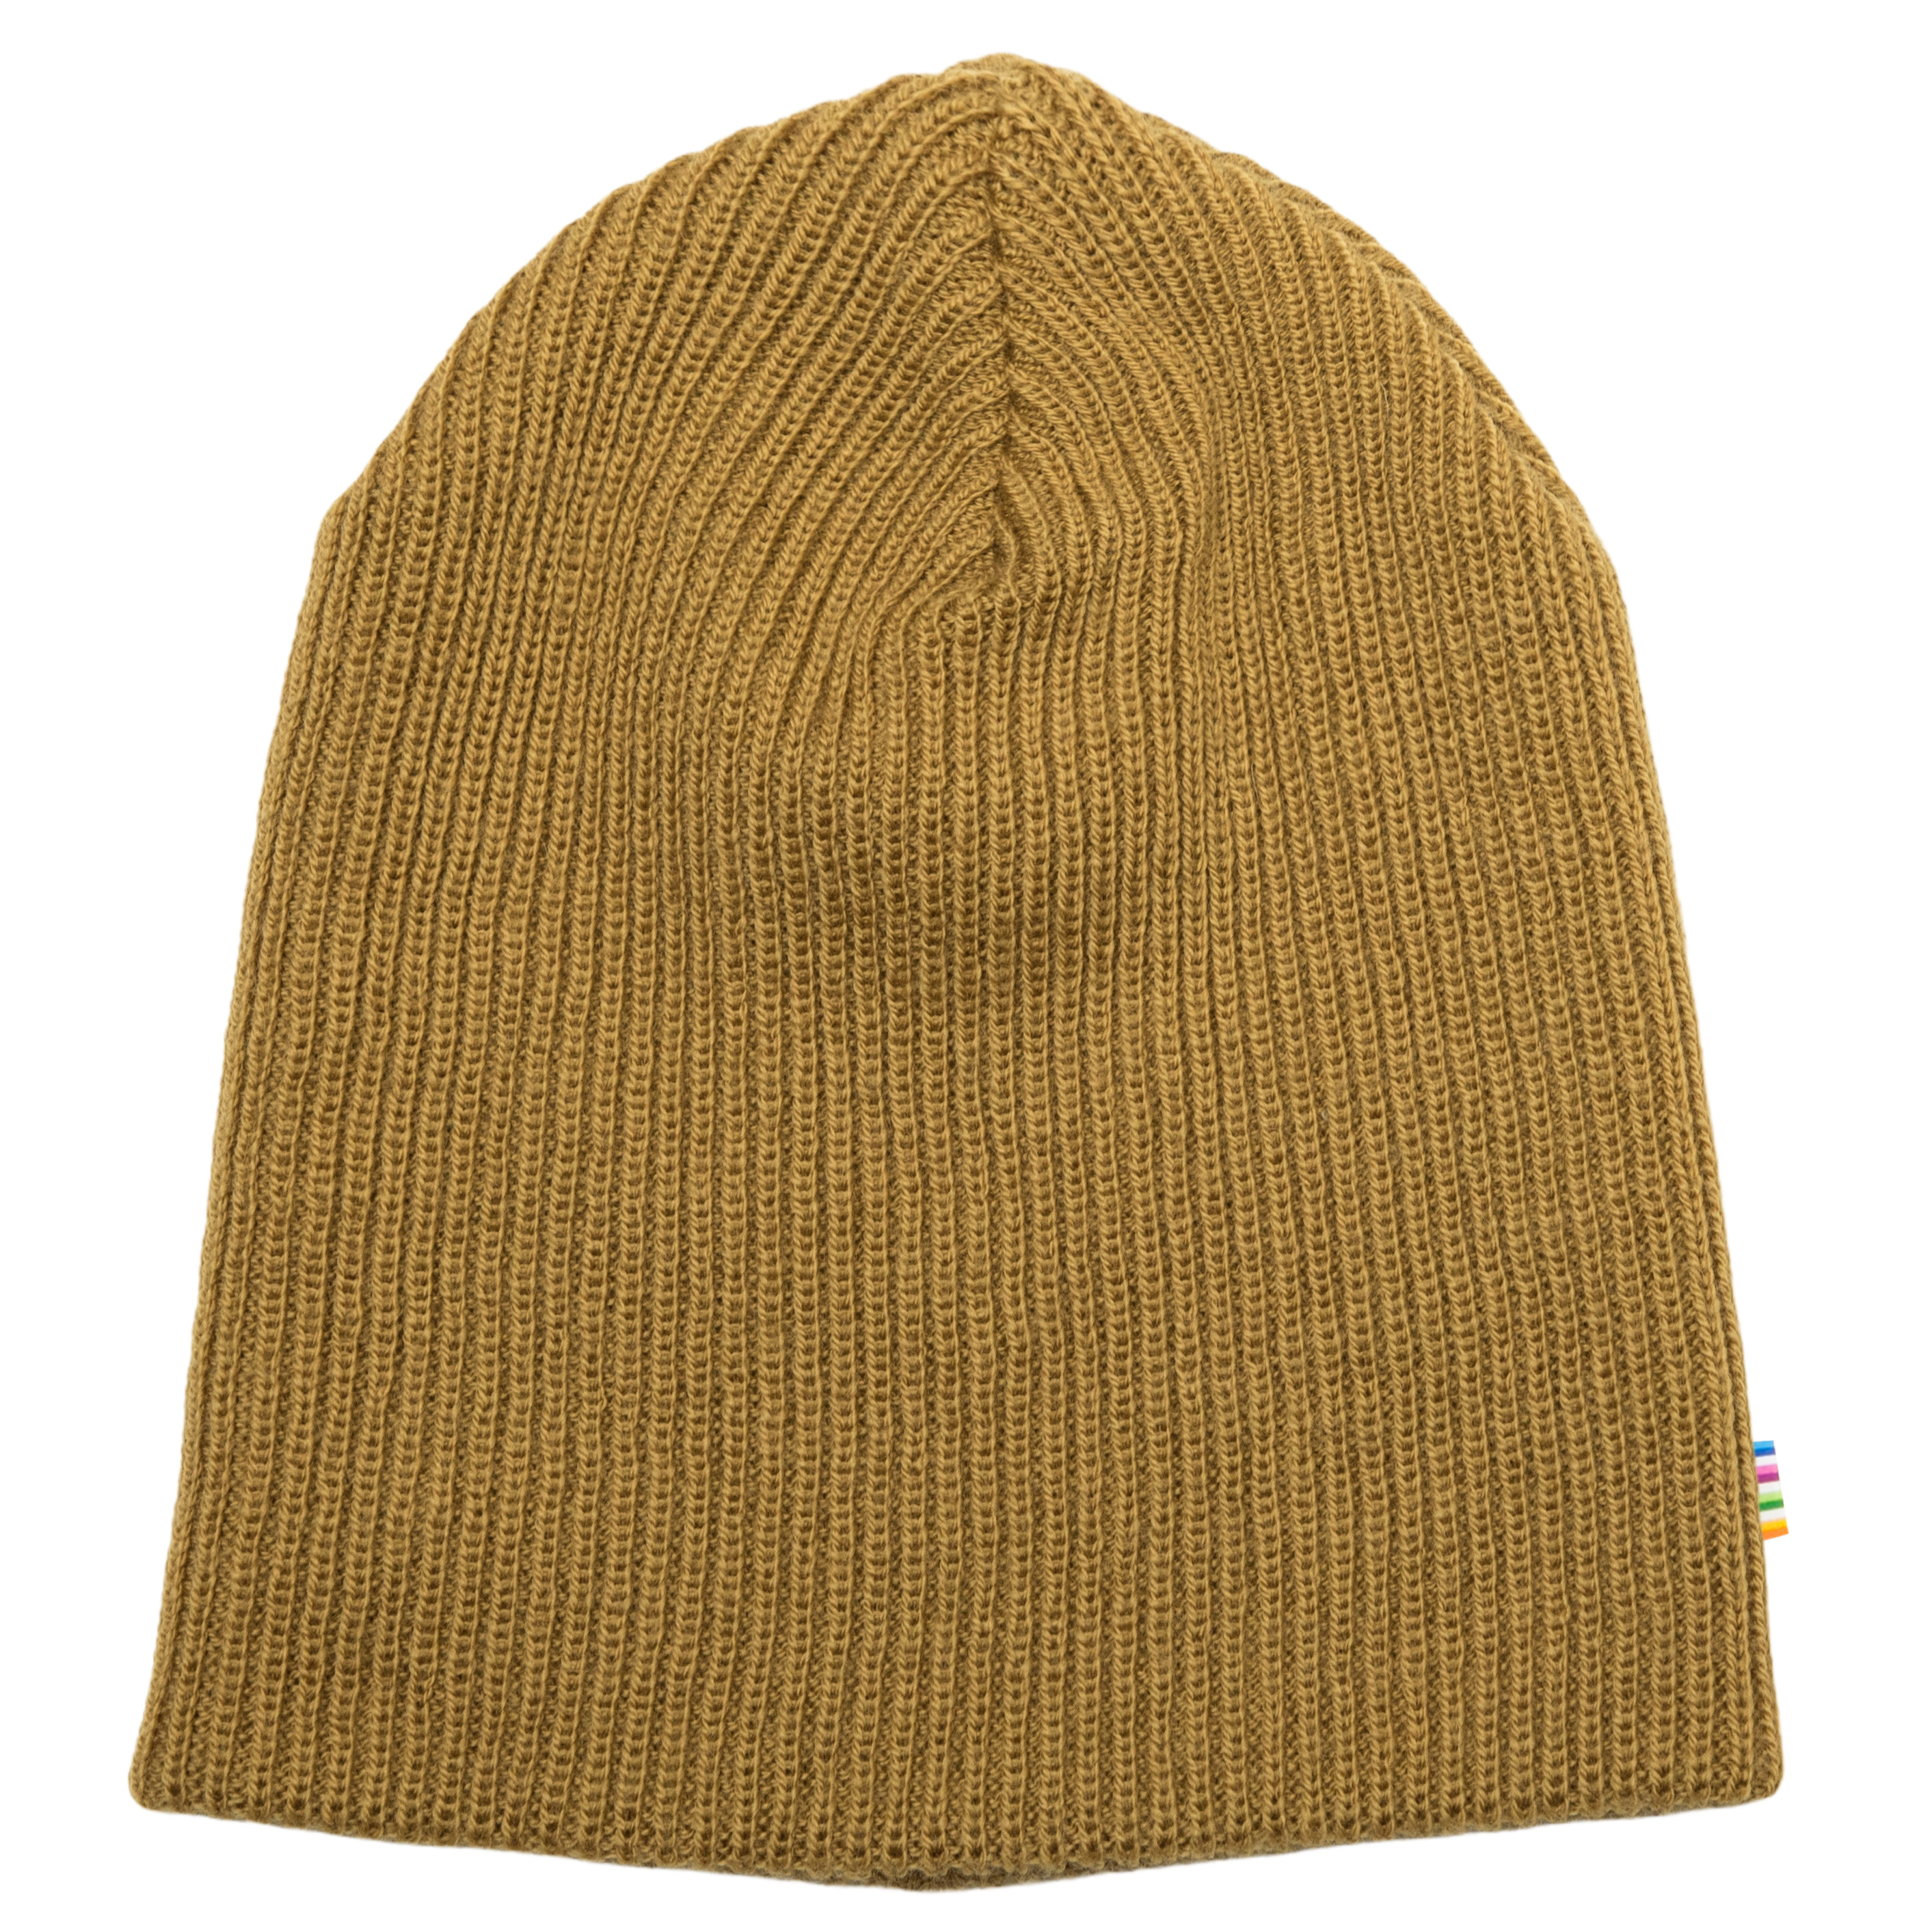 Hat, Curry, 50 cm